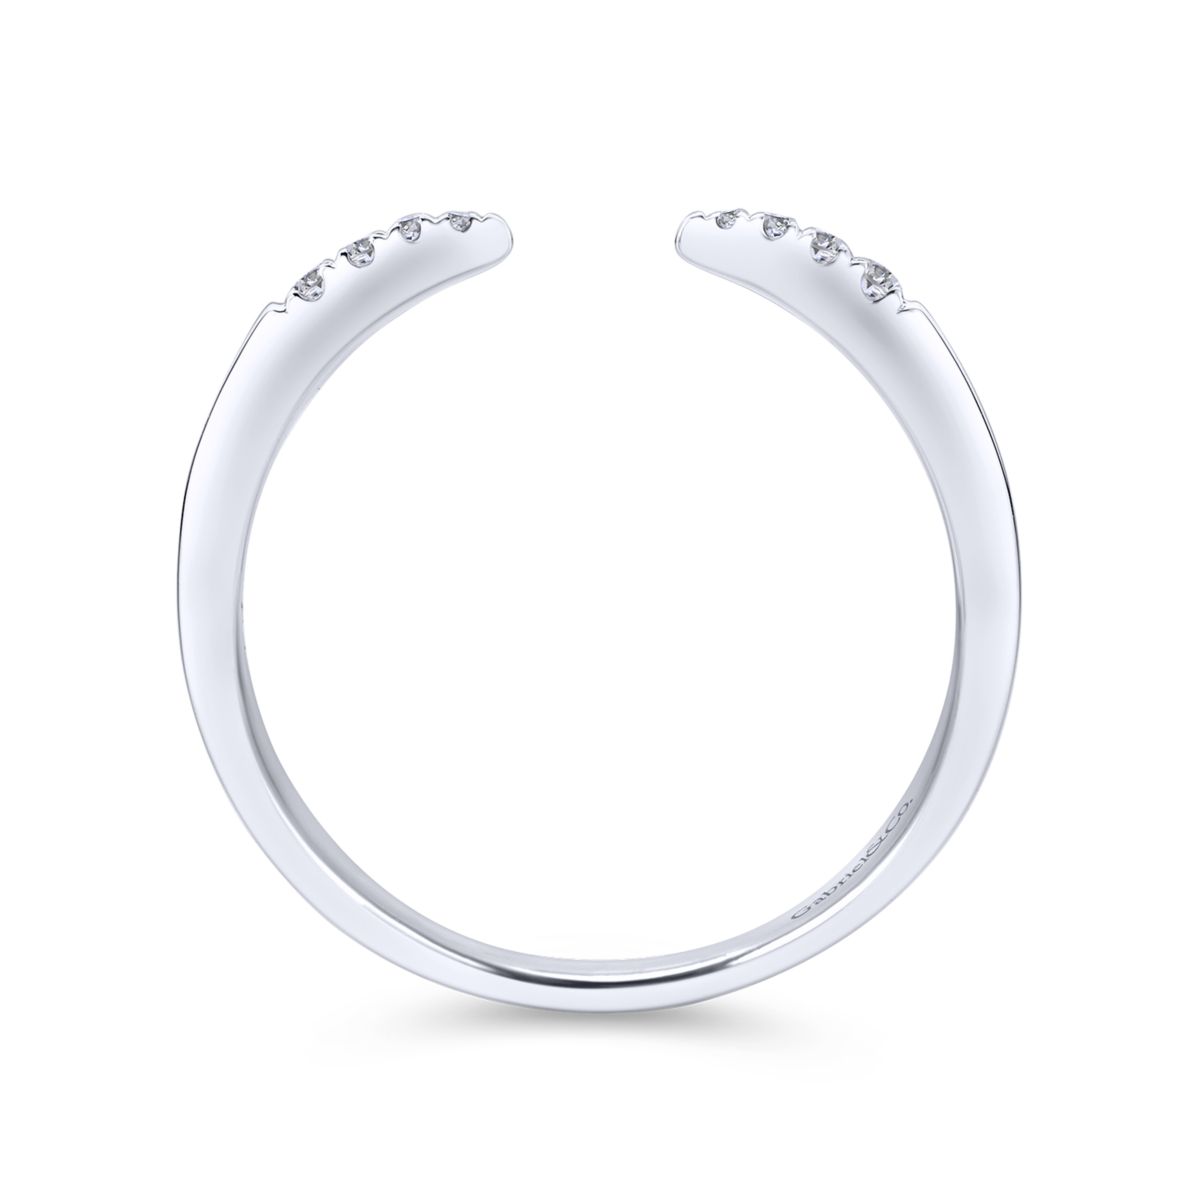 Gabriel Open Diamond Tipped Stackable Ring in 14kt White Gold (1/20ct tw)